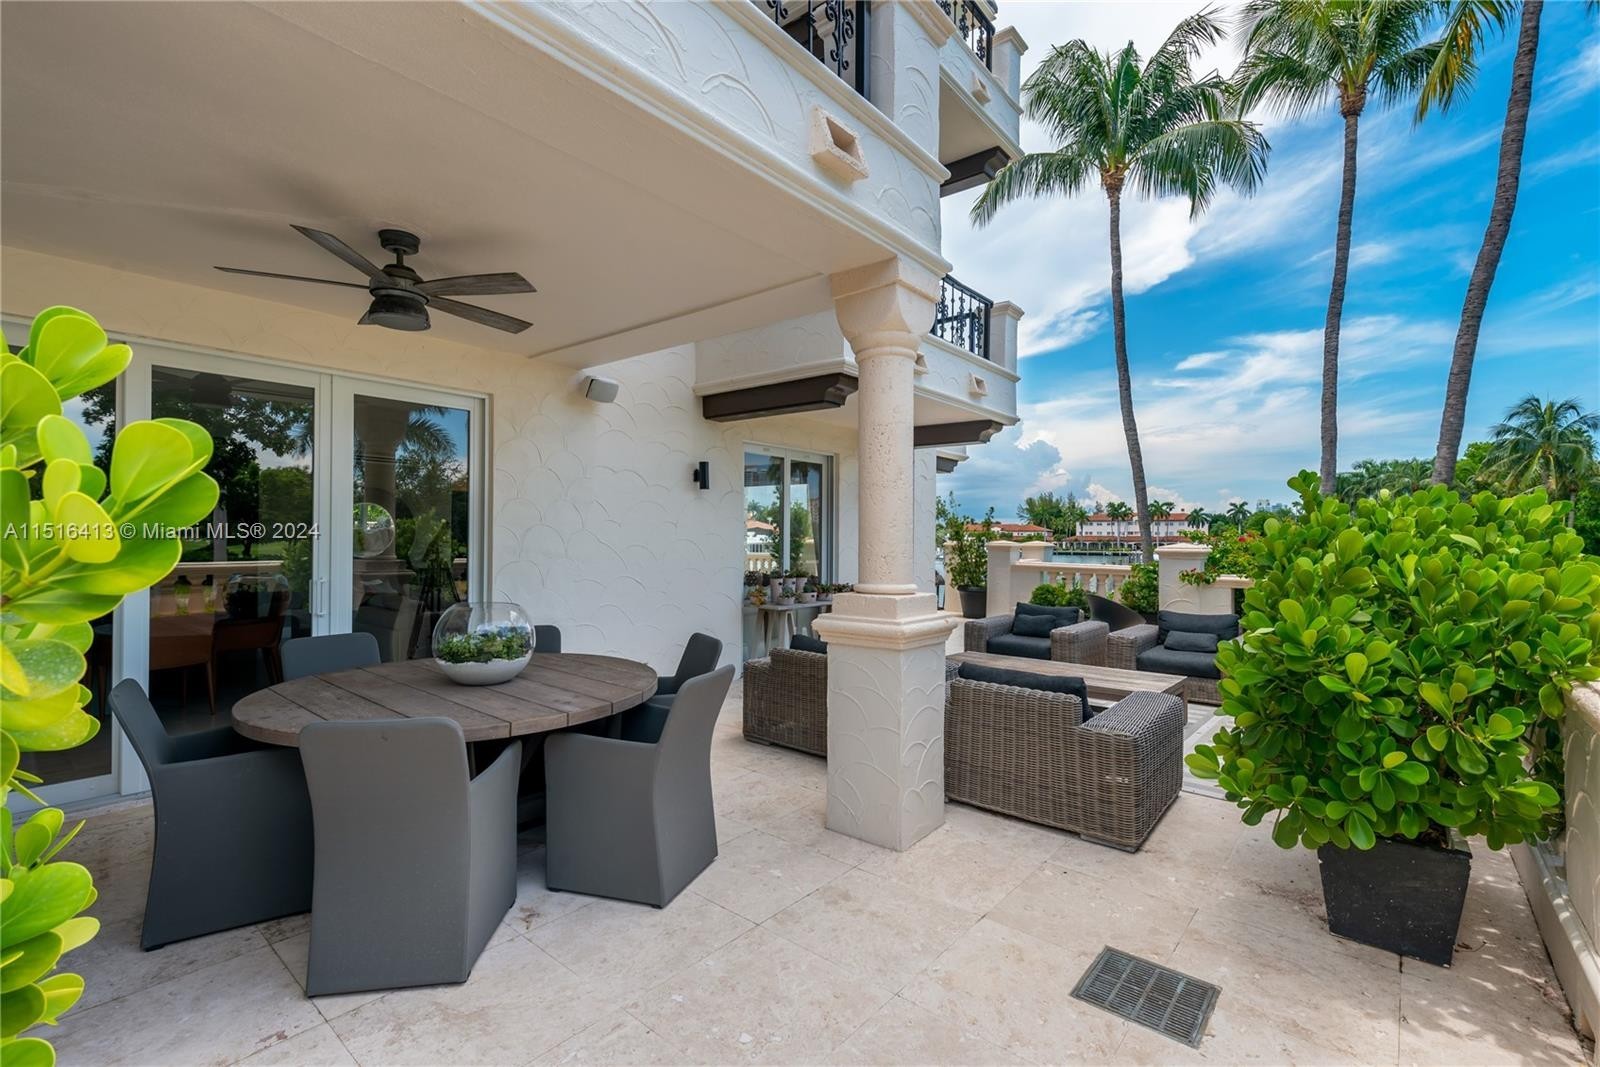 35. 2514 Fisher Island Dr